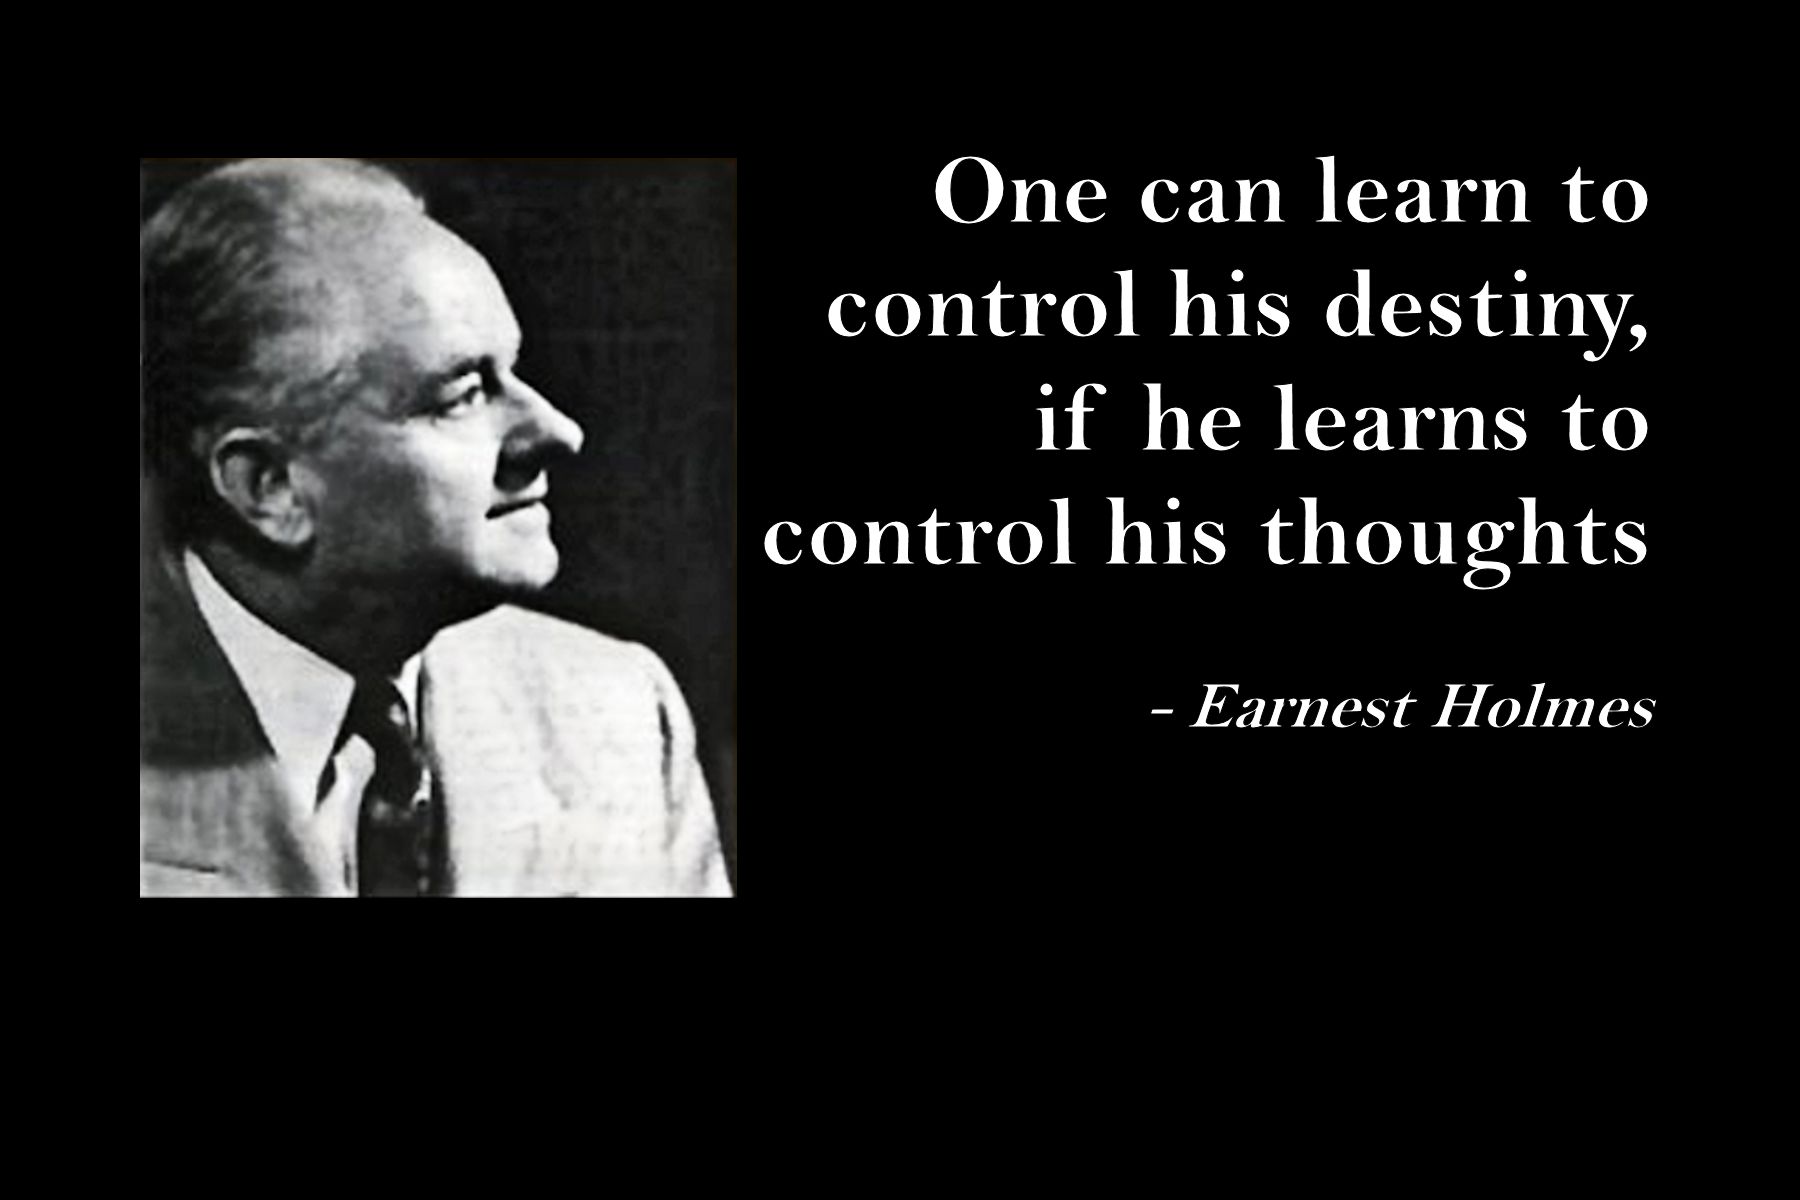 Earnest Holmes - Control your thoughts, control your destiny